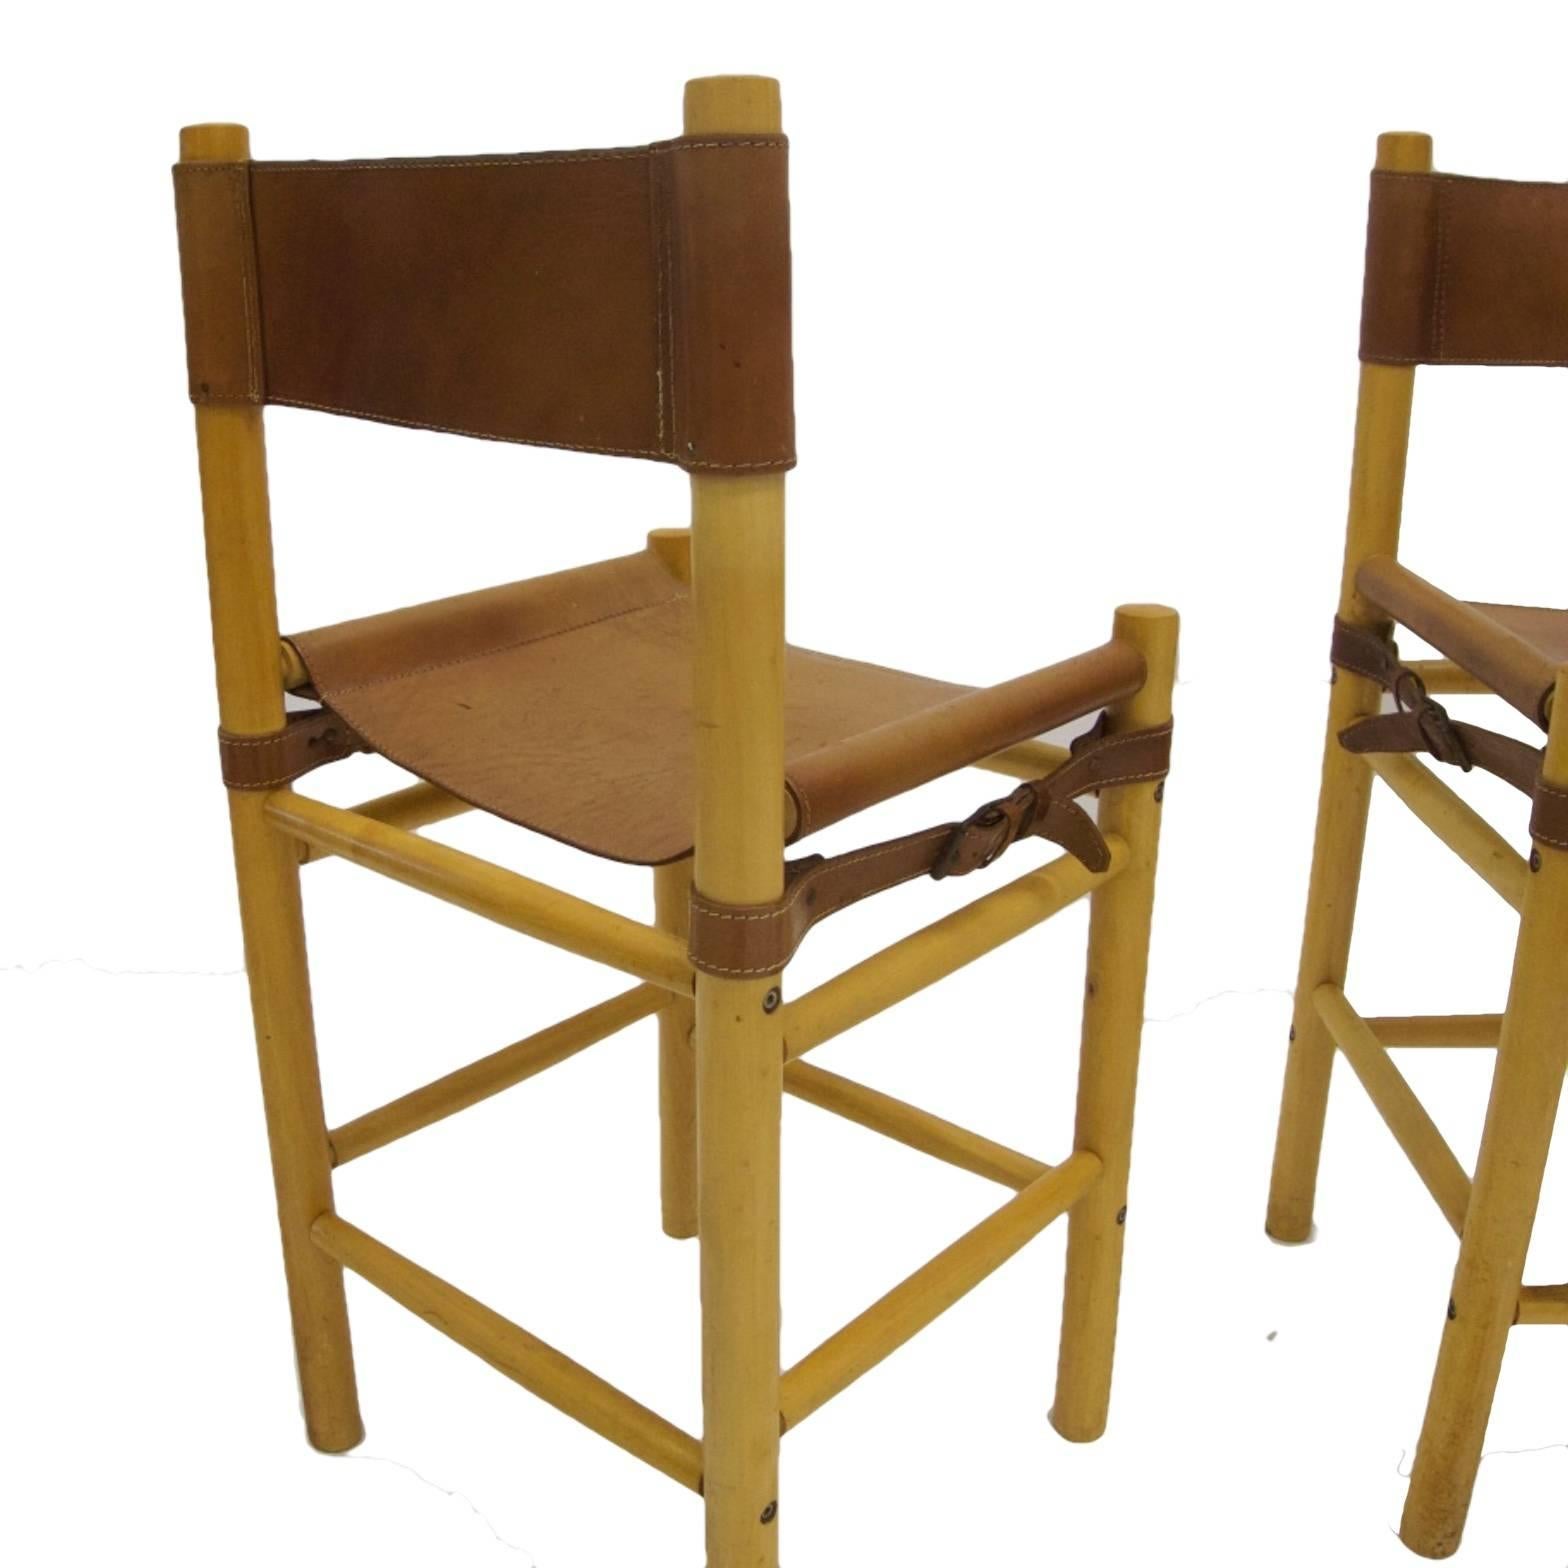 A set of three bar stools in beech and heavy stitched leather. Side buckle detail. Versatile stools are perfect for modern decor or farm house. Leather is stamped Argentina.